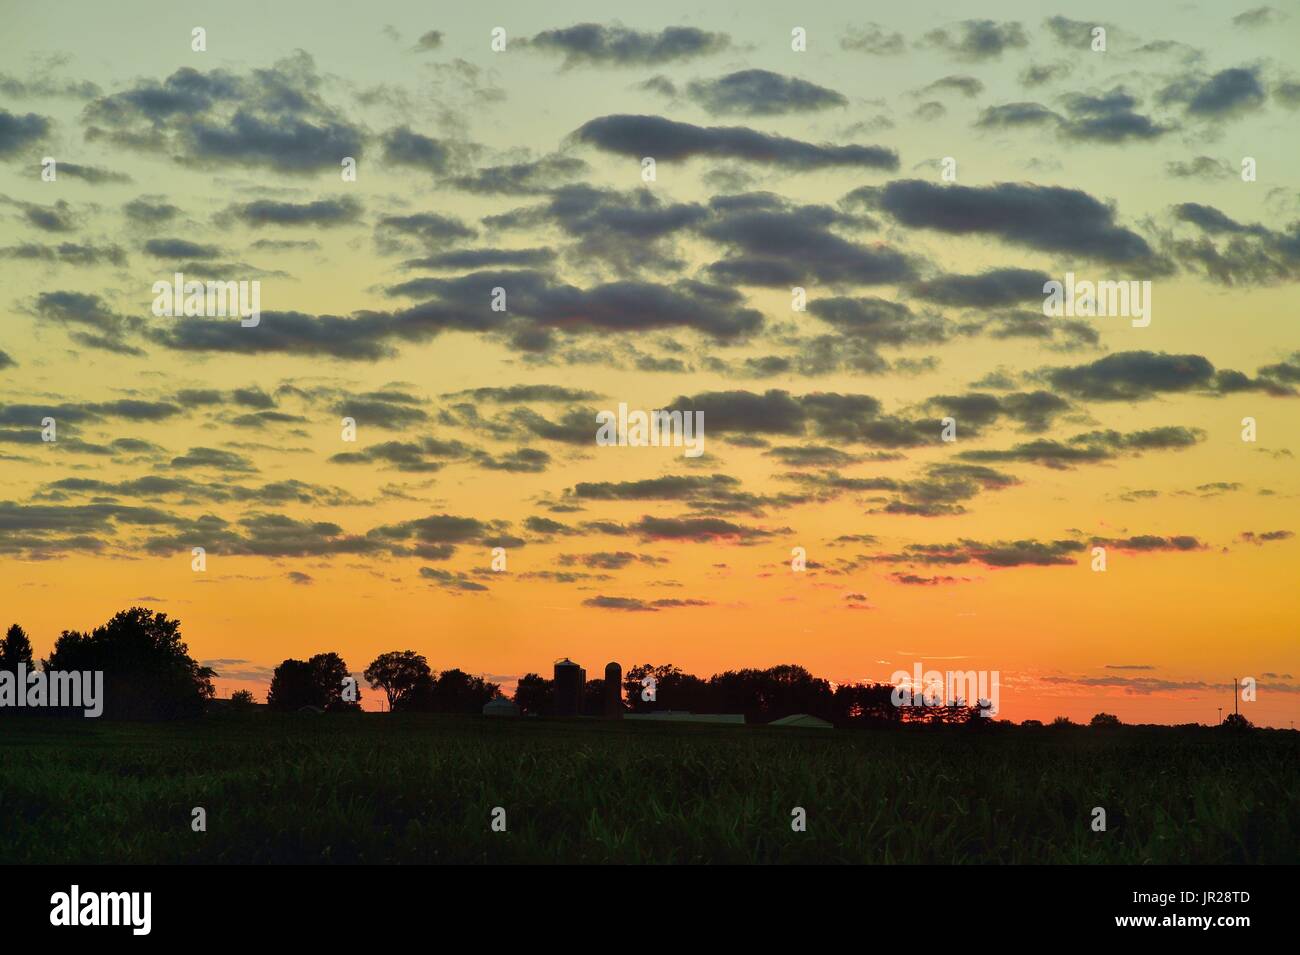 Burlington, Illinois, USA. Fair weather clouds drifting above farm country add texture and color to an already vivid summer sunset. Stock Photo